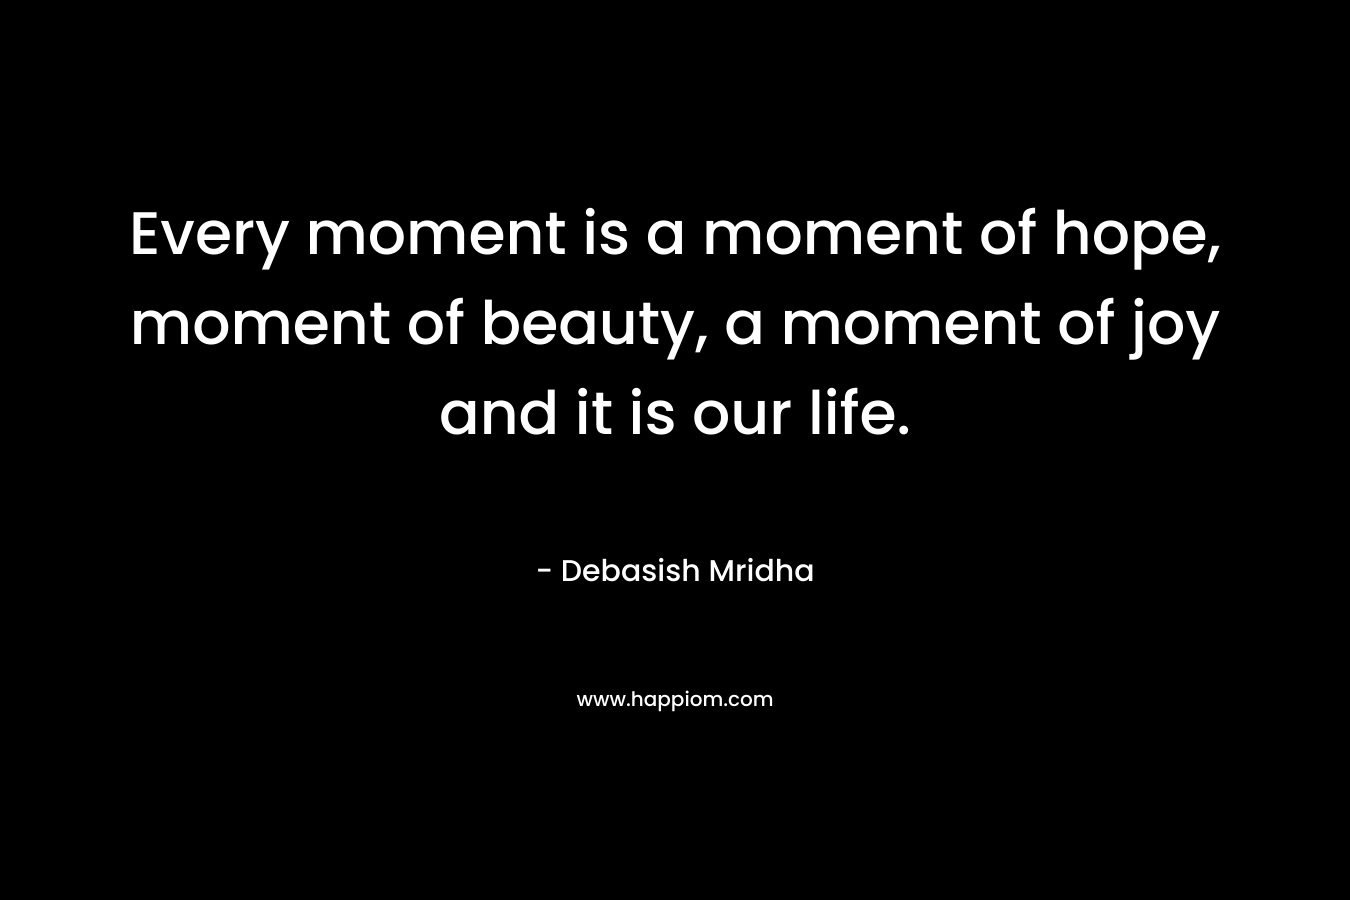 Every moment is a moment of hope, moment of beauty, a moment of joy and it is our life.